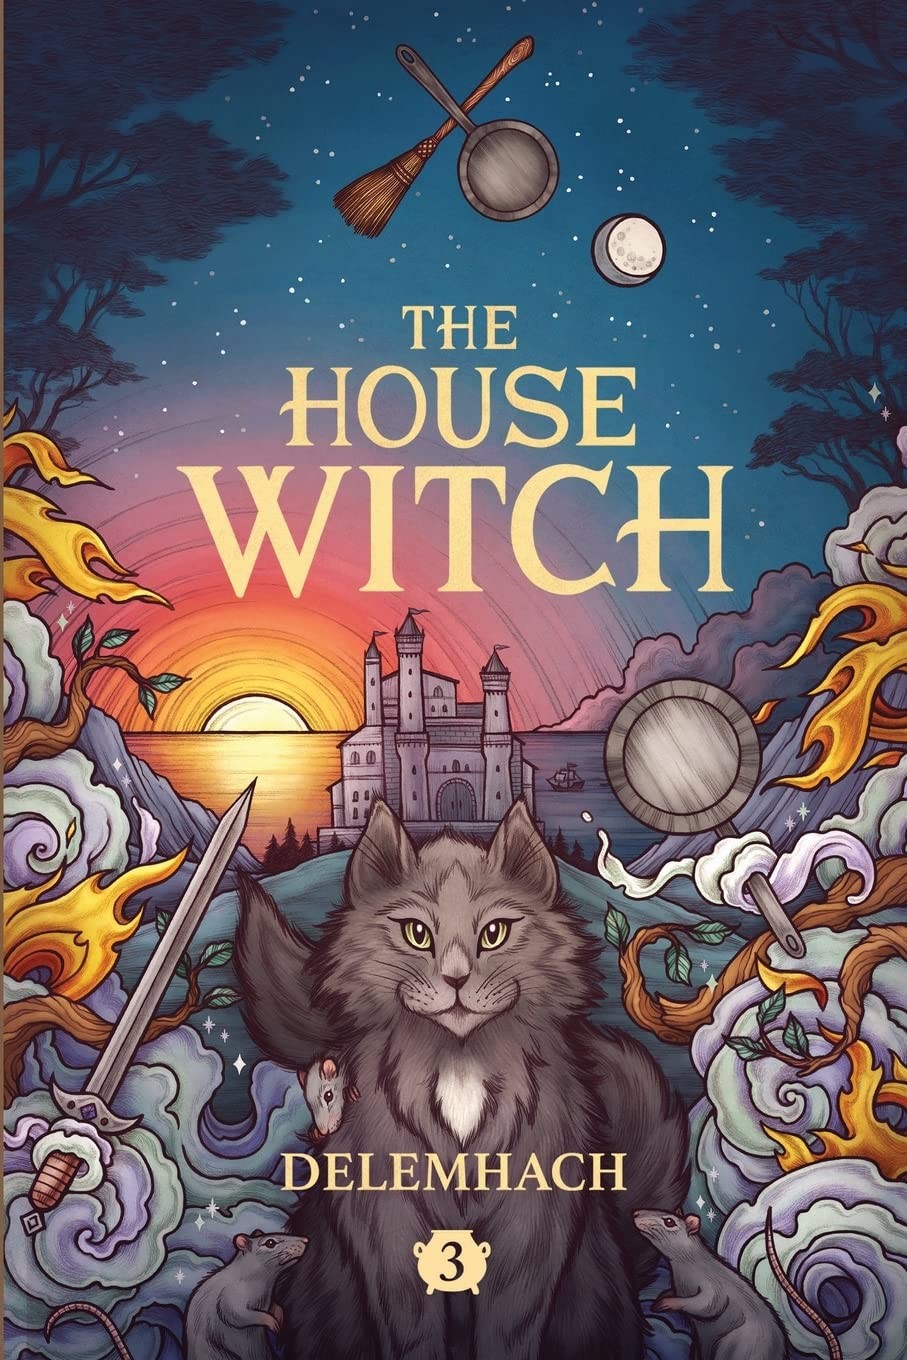 Book cover art for The House Witch 3.